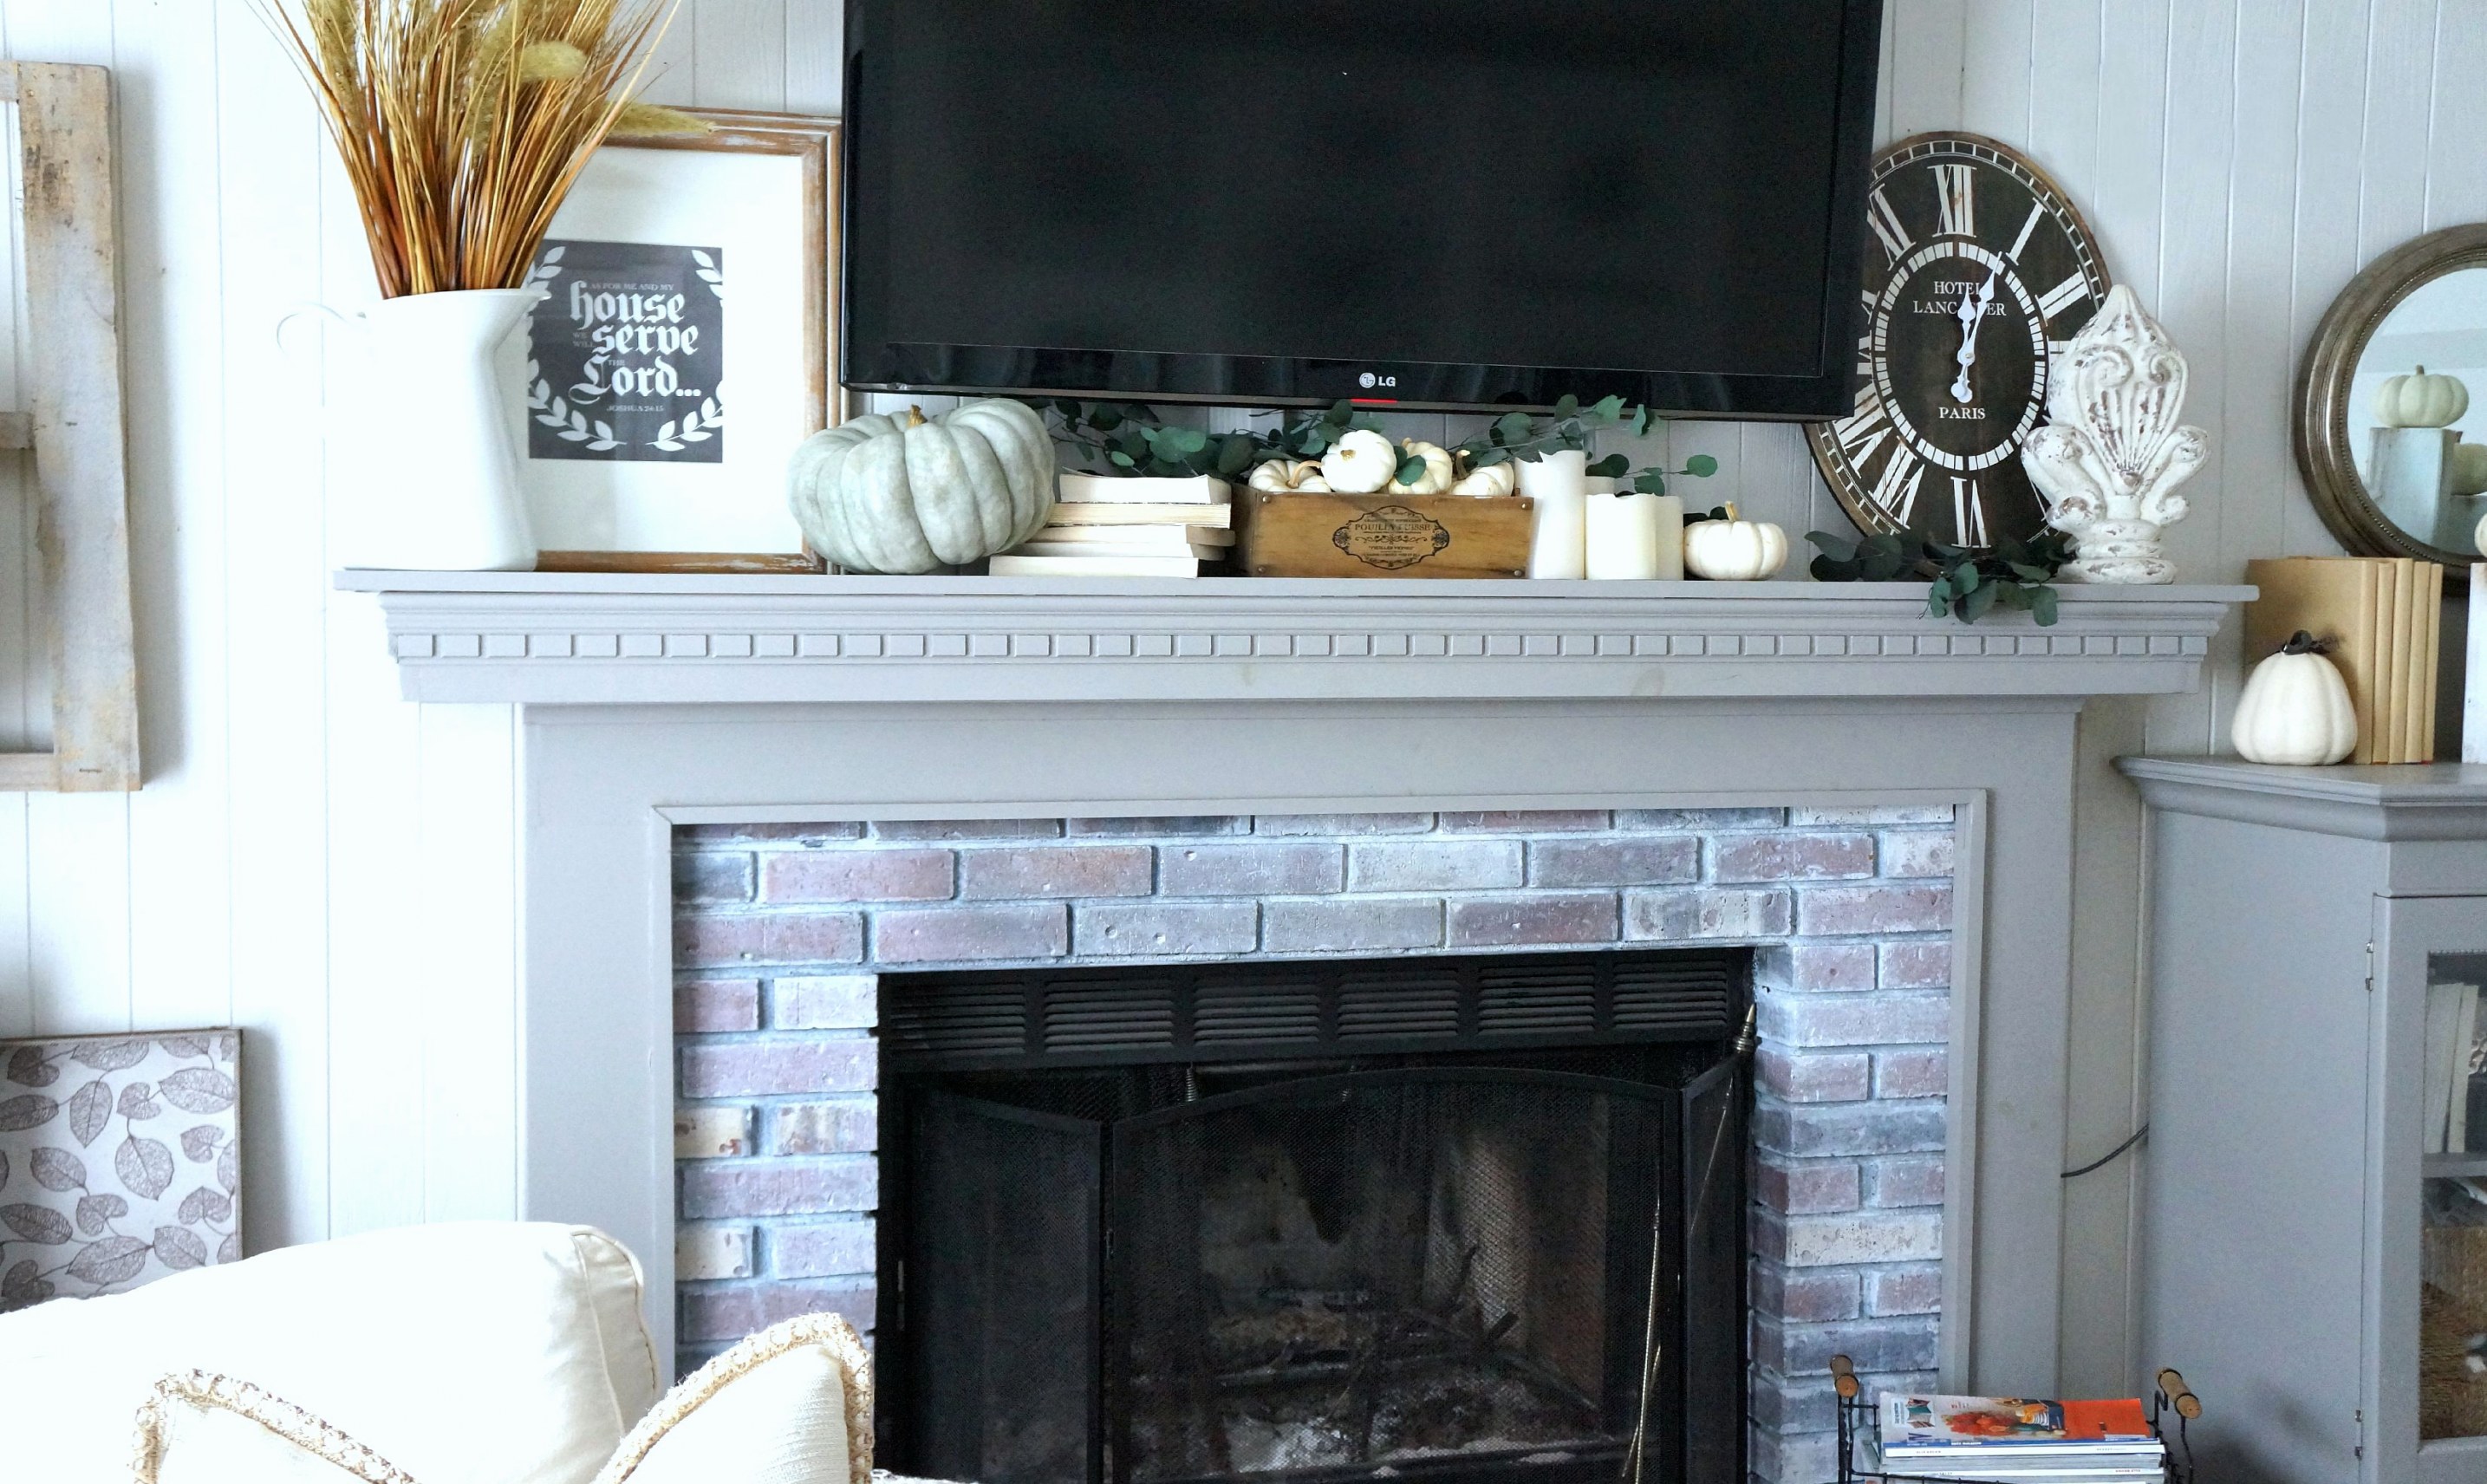 Mirrored Fireplace Unique Fall Mantel Ideas Fall Decor for Fireplace Mantel Luxury 18